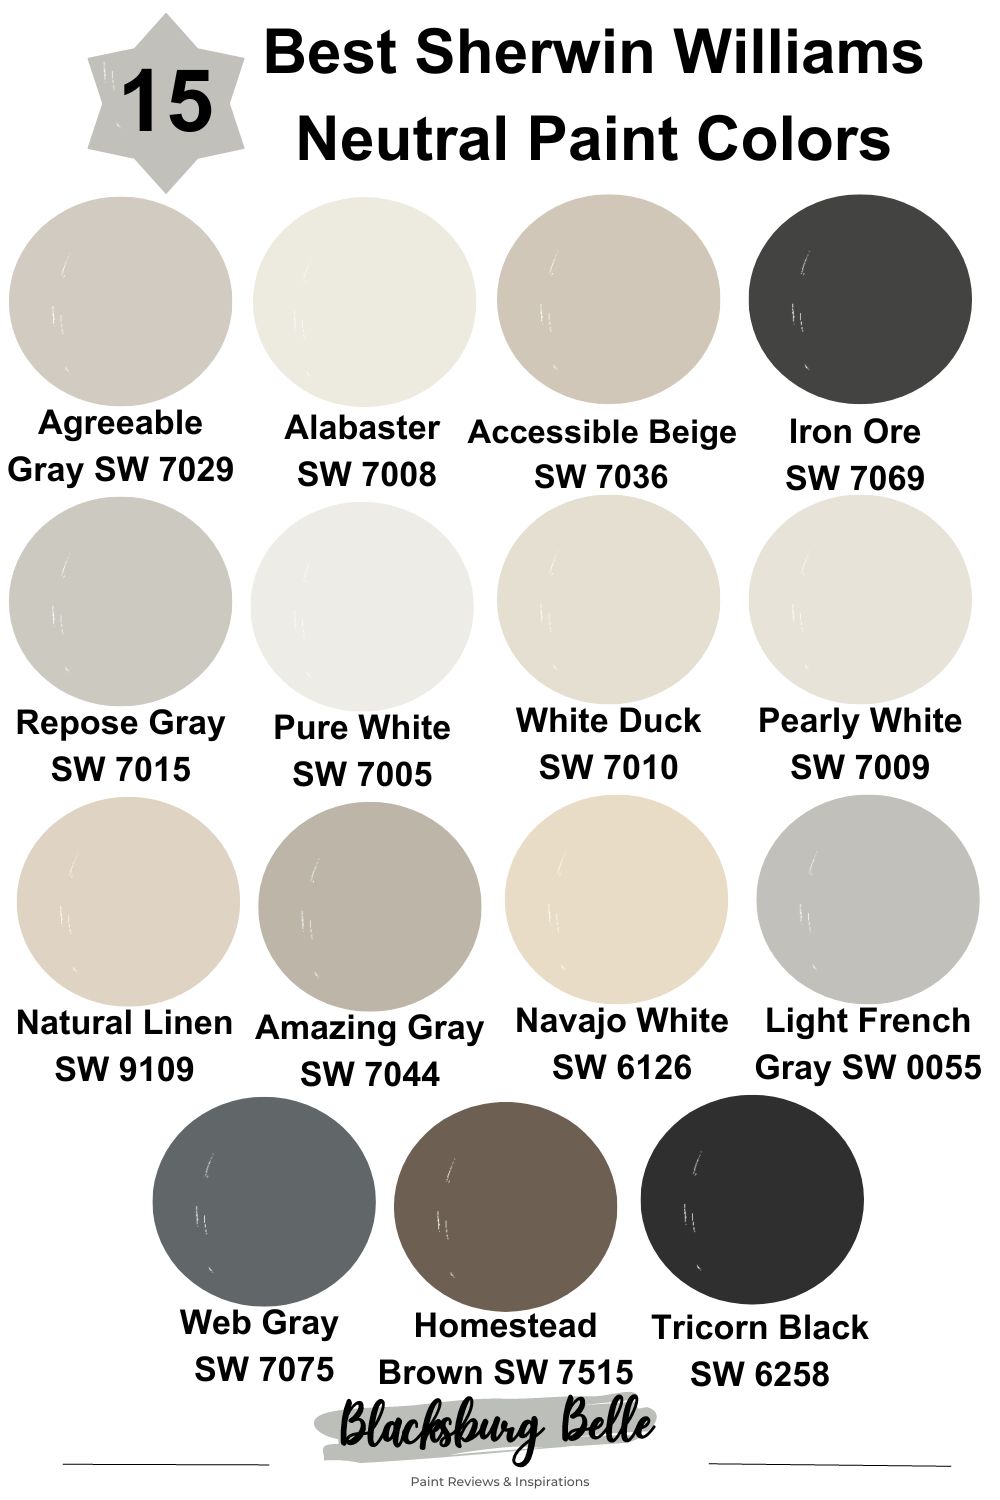 15 Best Sherwin Williams Neutral Paint Colors for 2023